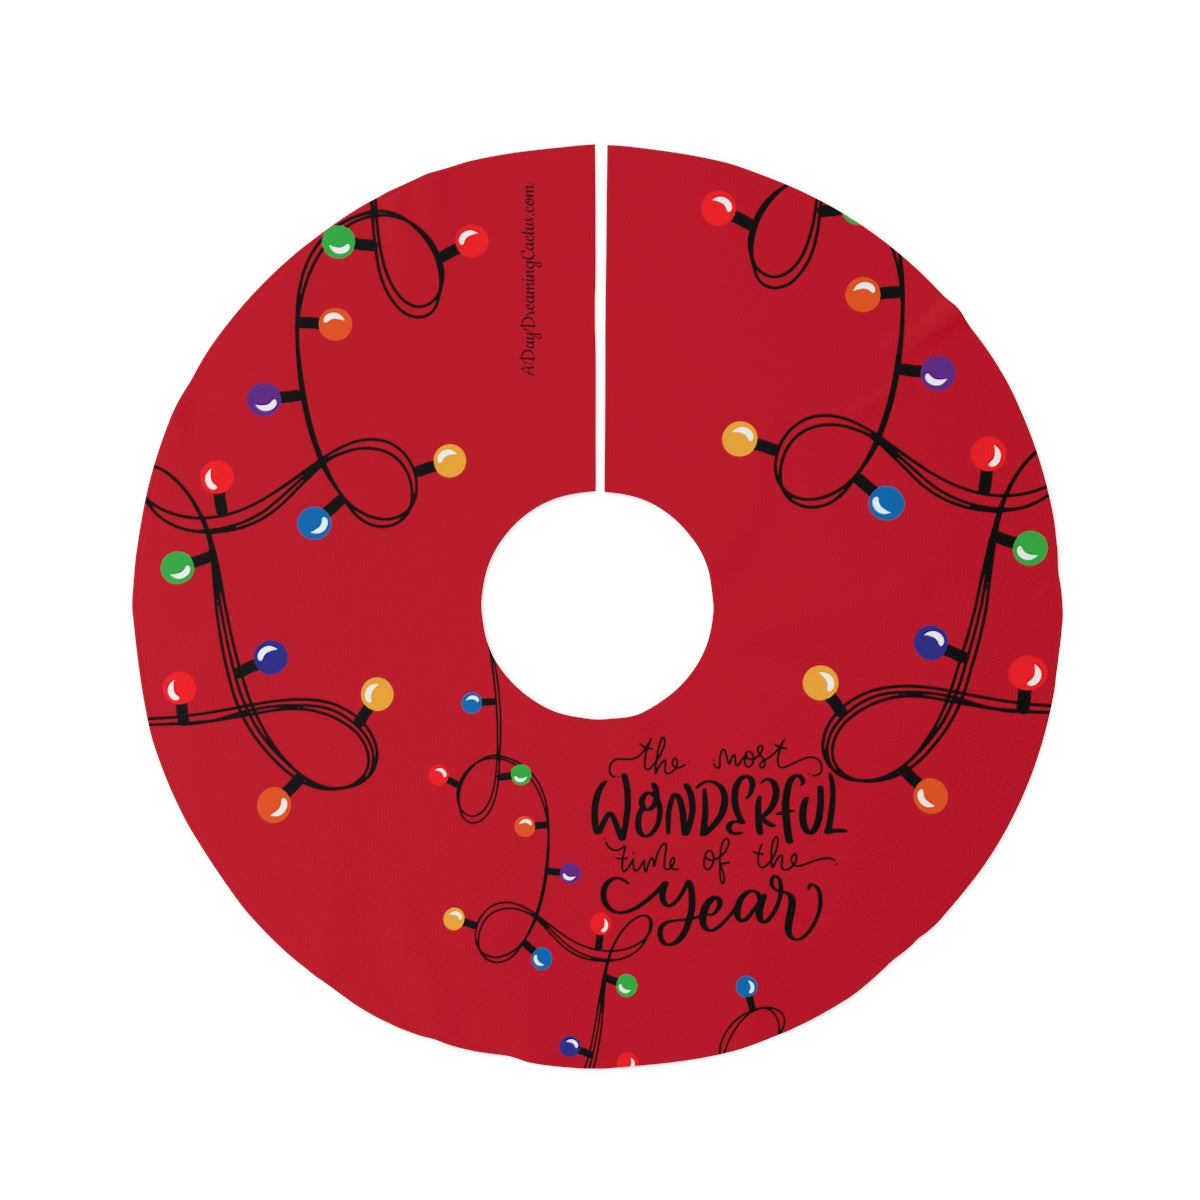 The Most Wonderful Time of Year with String of Colorful Lights ~ Christmas Holiday Round Tree Skirt